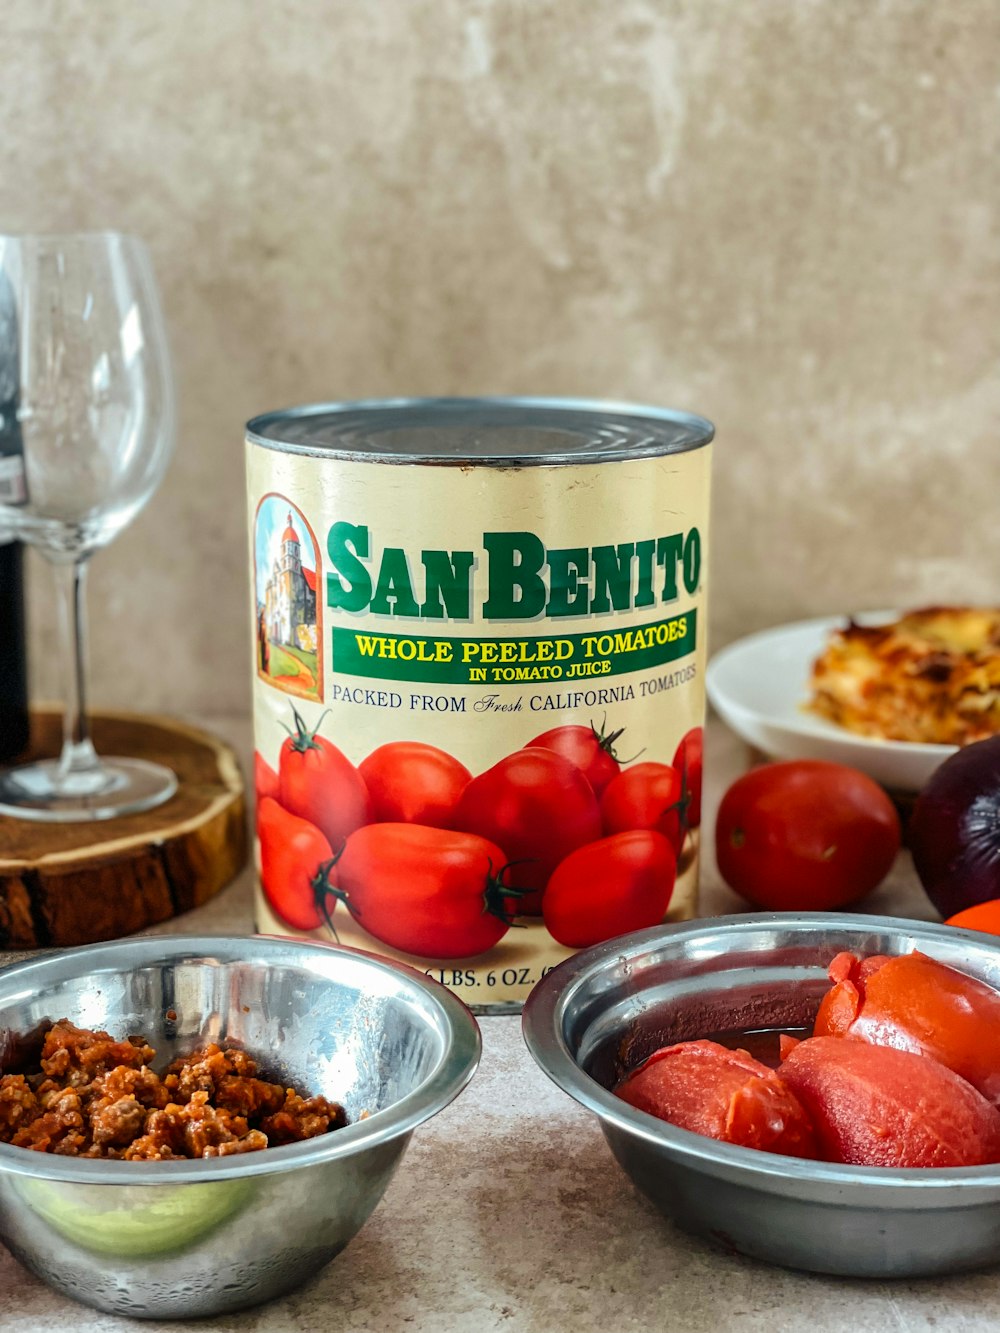 a can of san benito whole peeled tomatoes and other ingredients